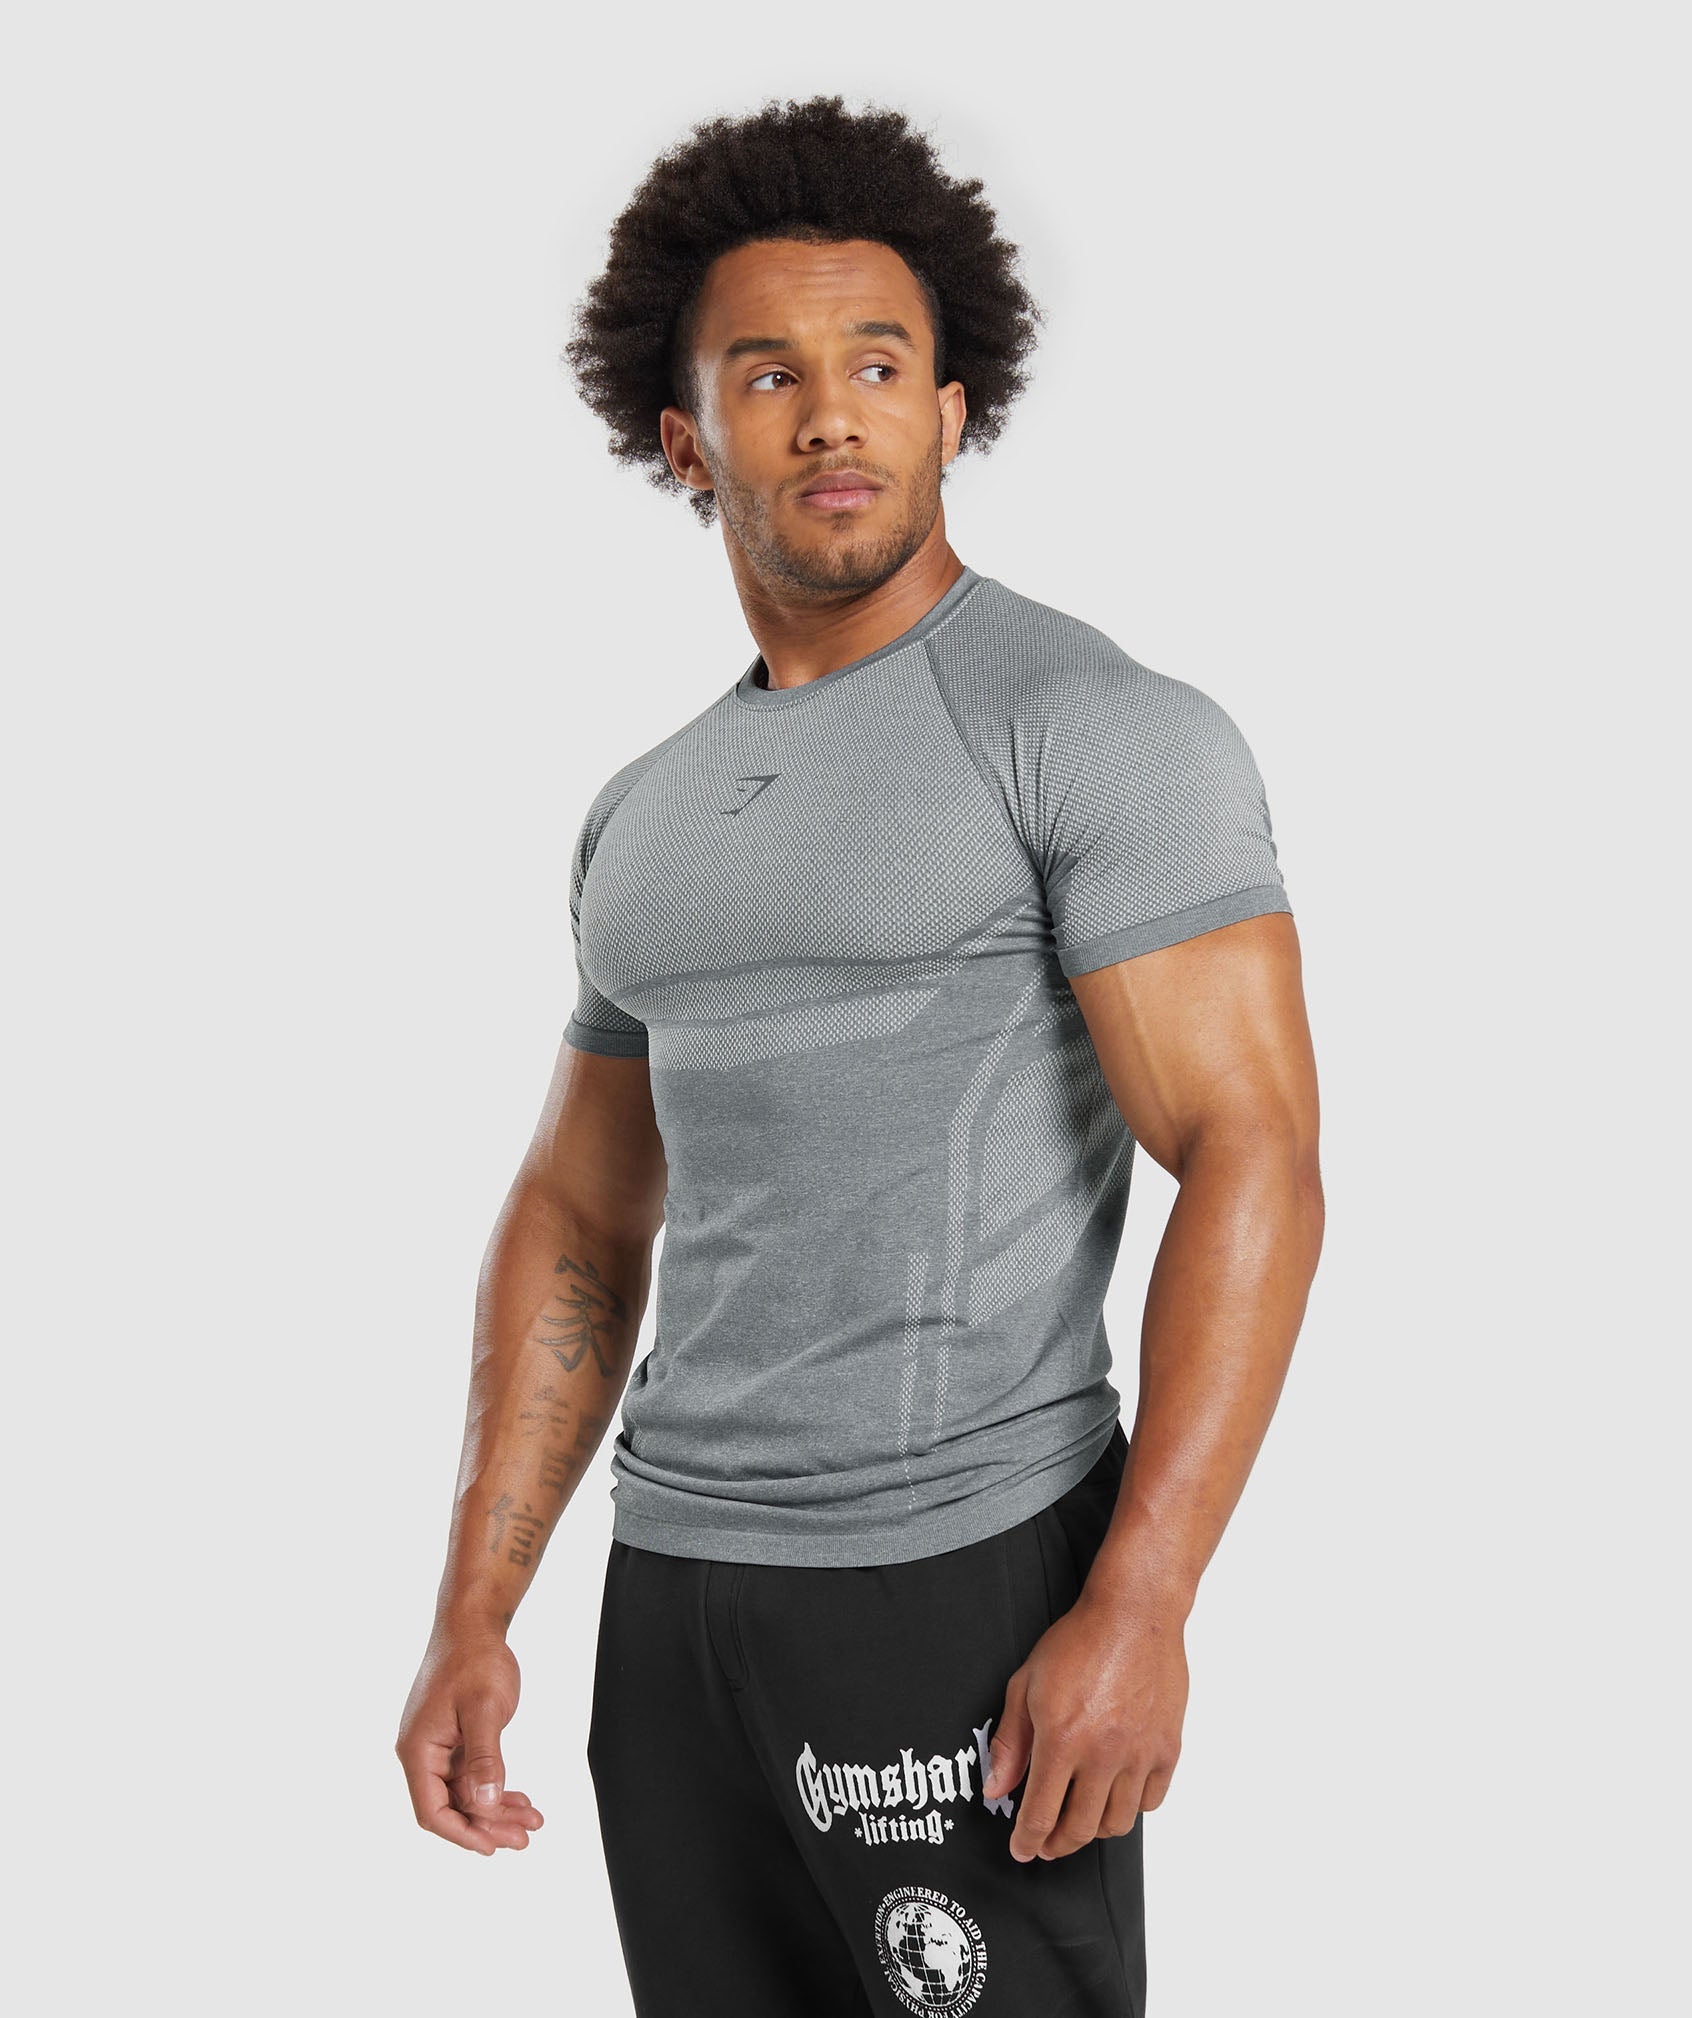 Elite Seamless T-Shirt in Pitch Grey/Light Grey - view 3